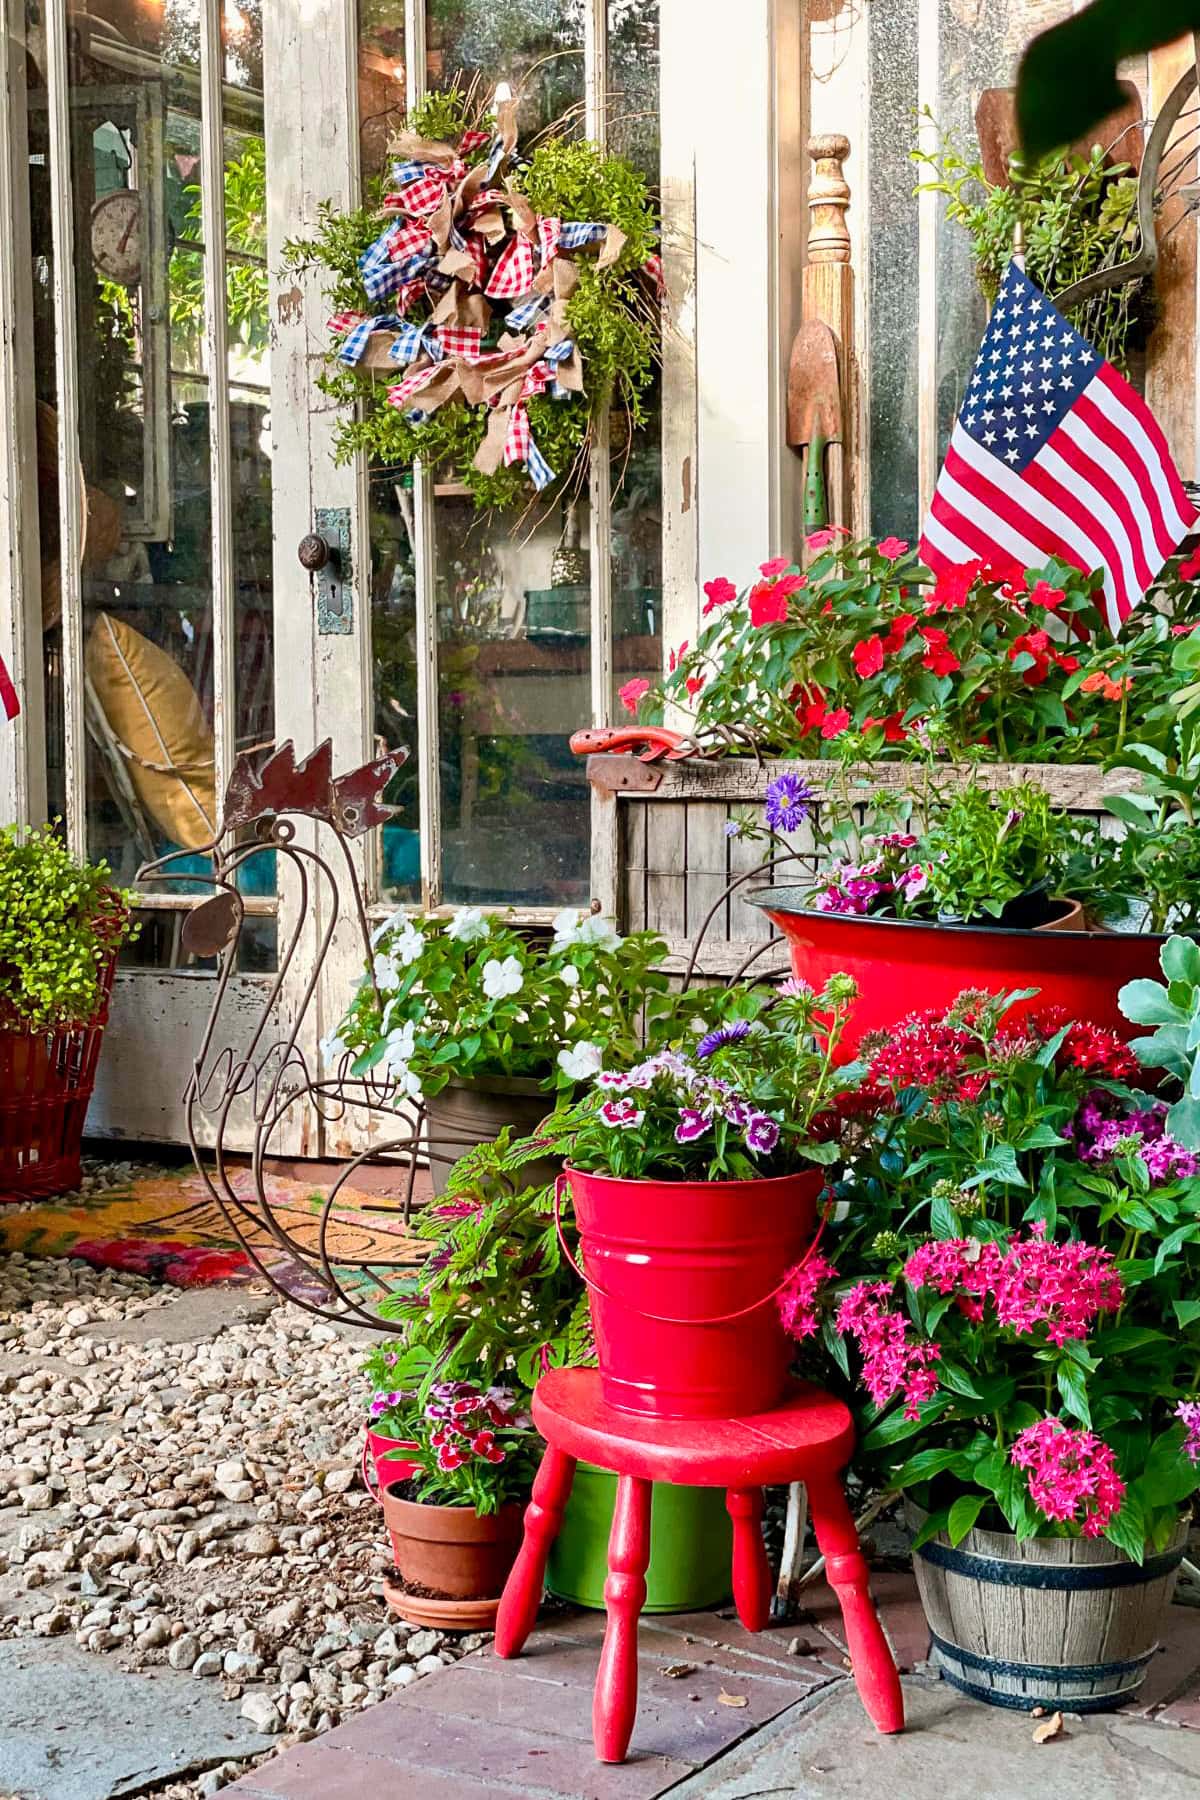 American flags decorating the garden planters